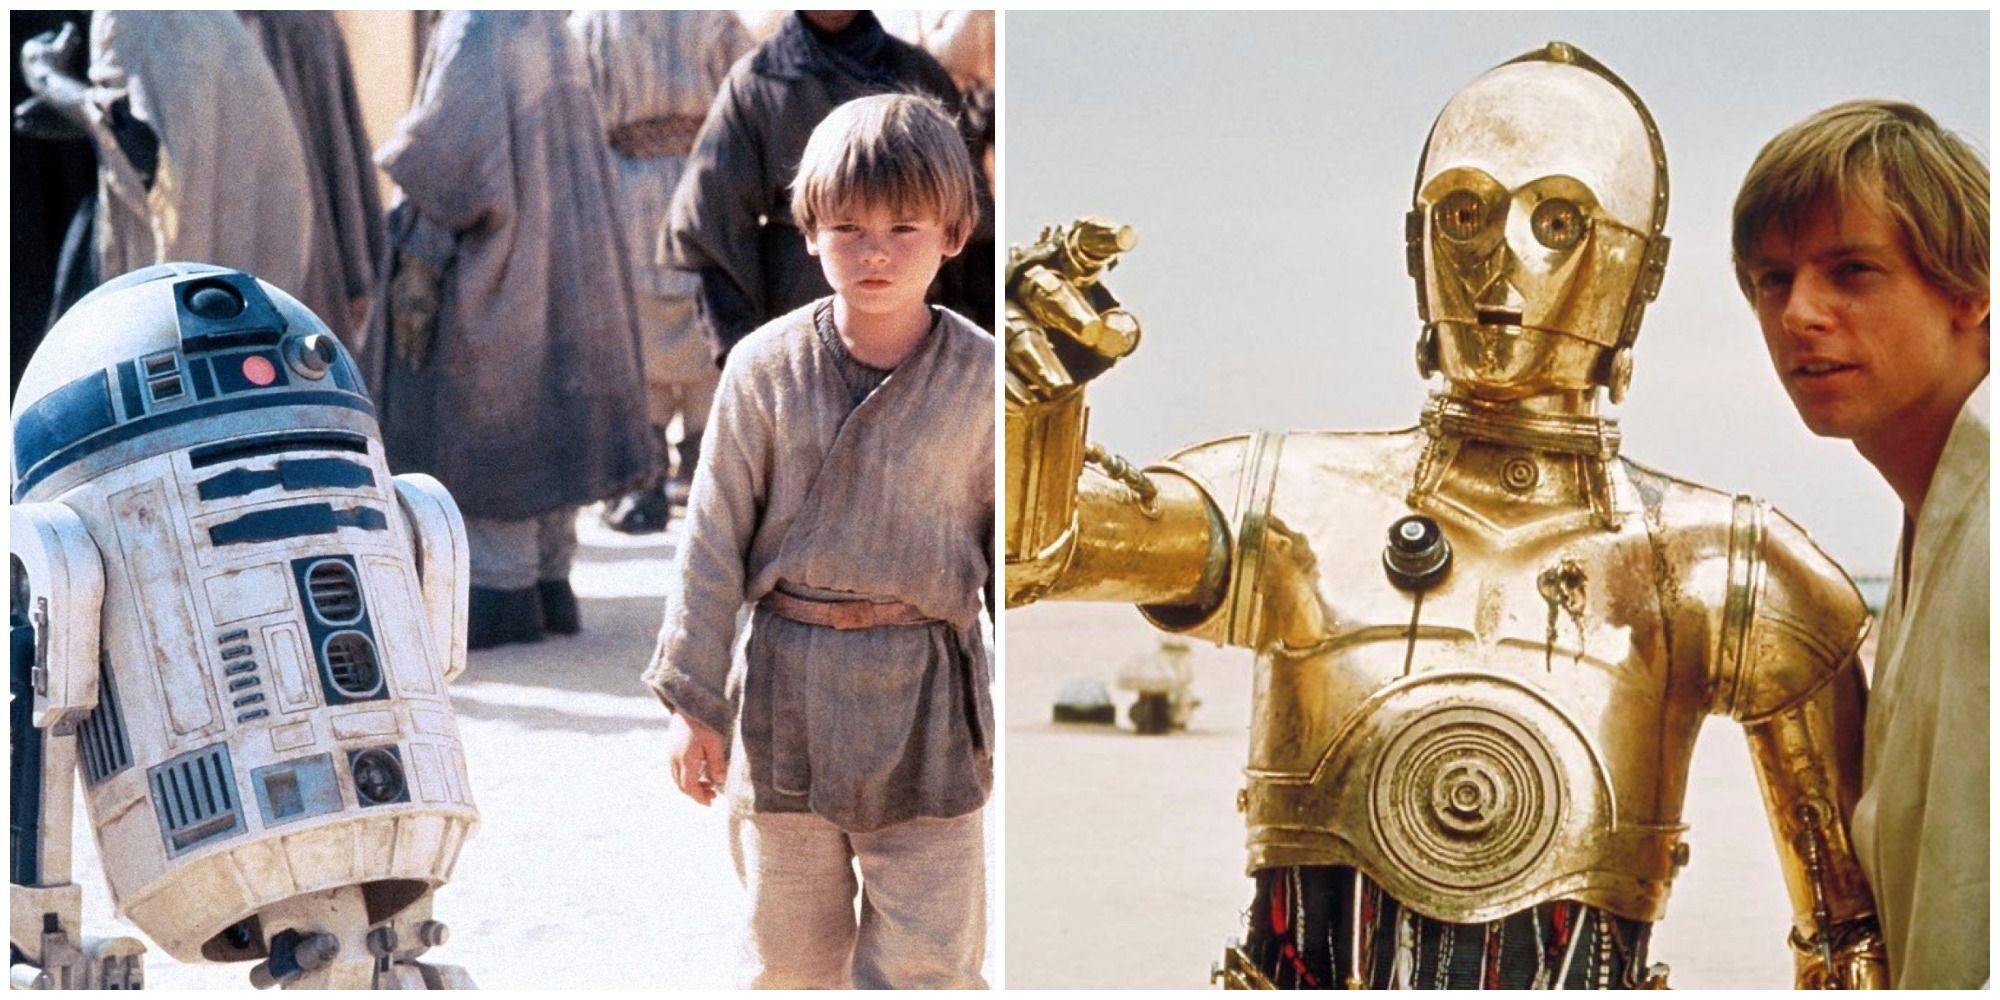 R2-D2 and Anakin in The Phantom Menace and C-3PO and Luke in A New Hope.